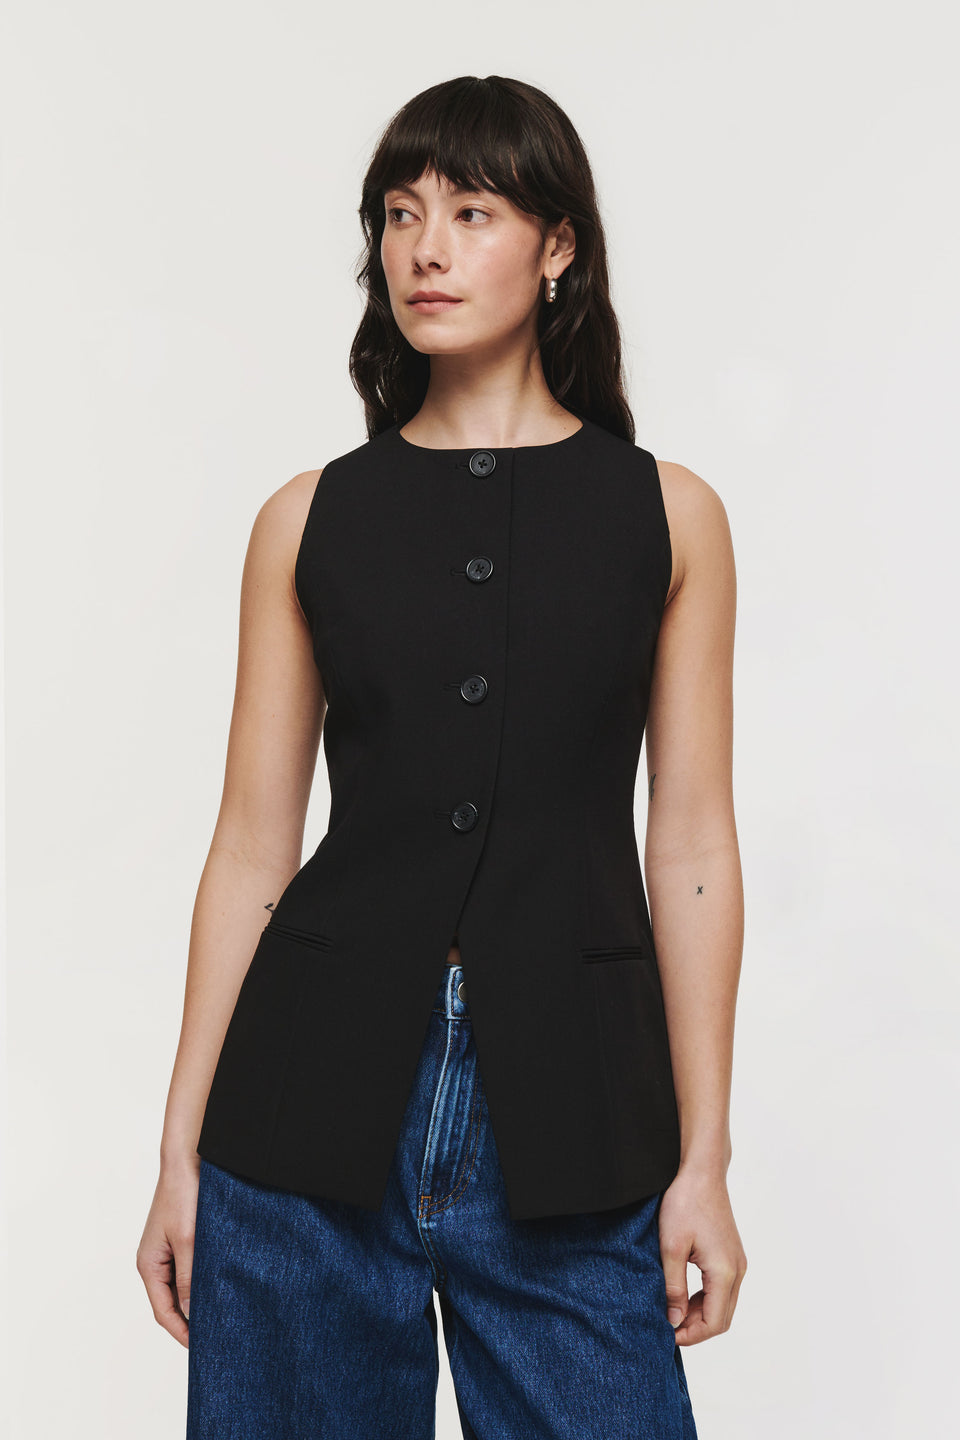 Leo is ALIGNE's contemporary take on a timeless, classic waistcoat. Designed for a longline fit, it has a high, slightly curved neckline and waisted silhouette. Wear with a pair of tailored trousers for a look that works for nights out – or with jeans for a more casual take.